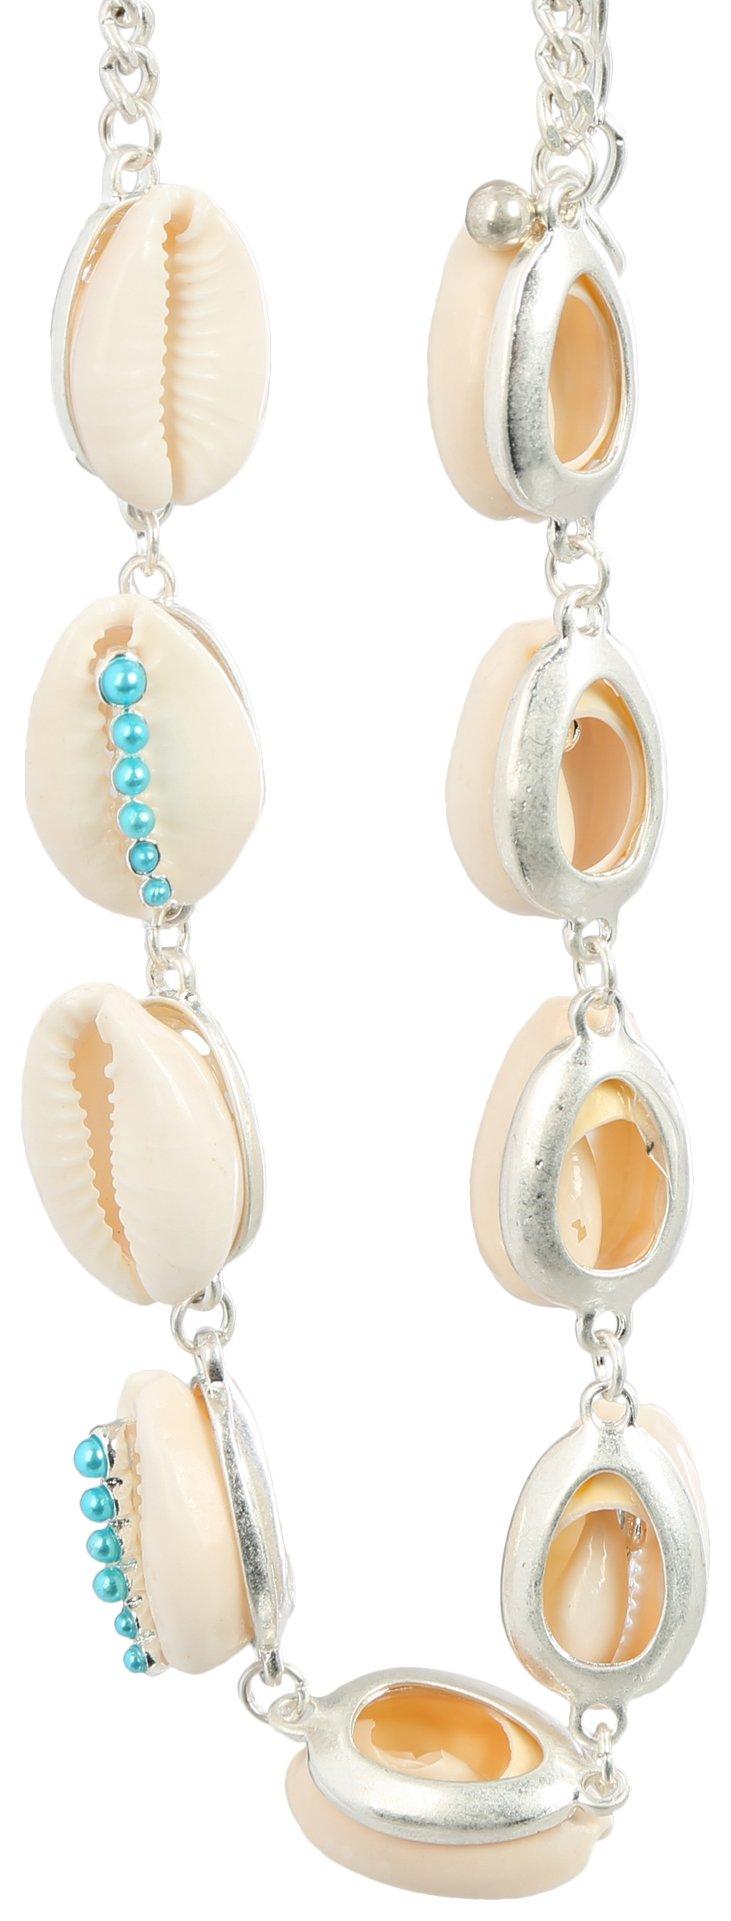 16 In. Frontal Cowrie Shell Necklace